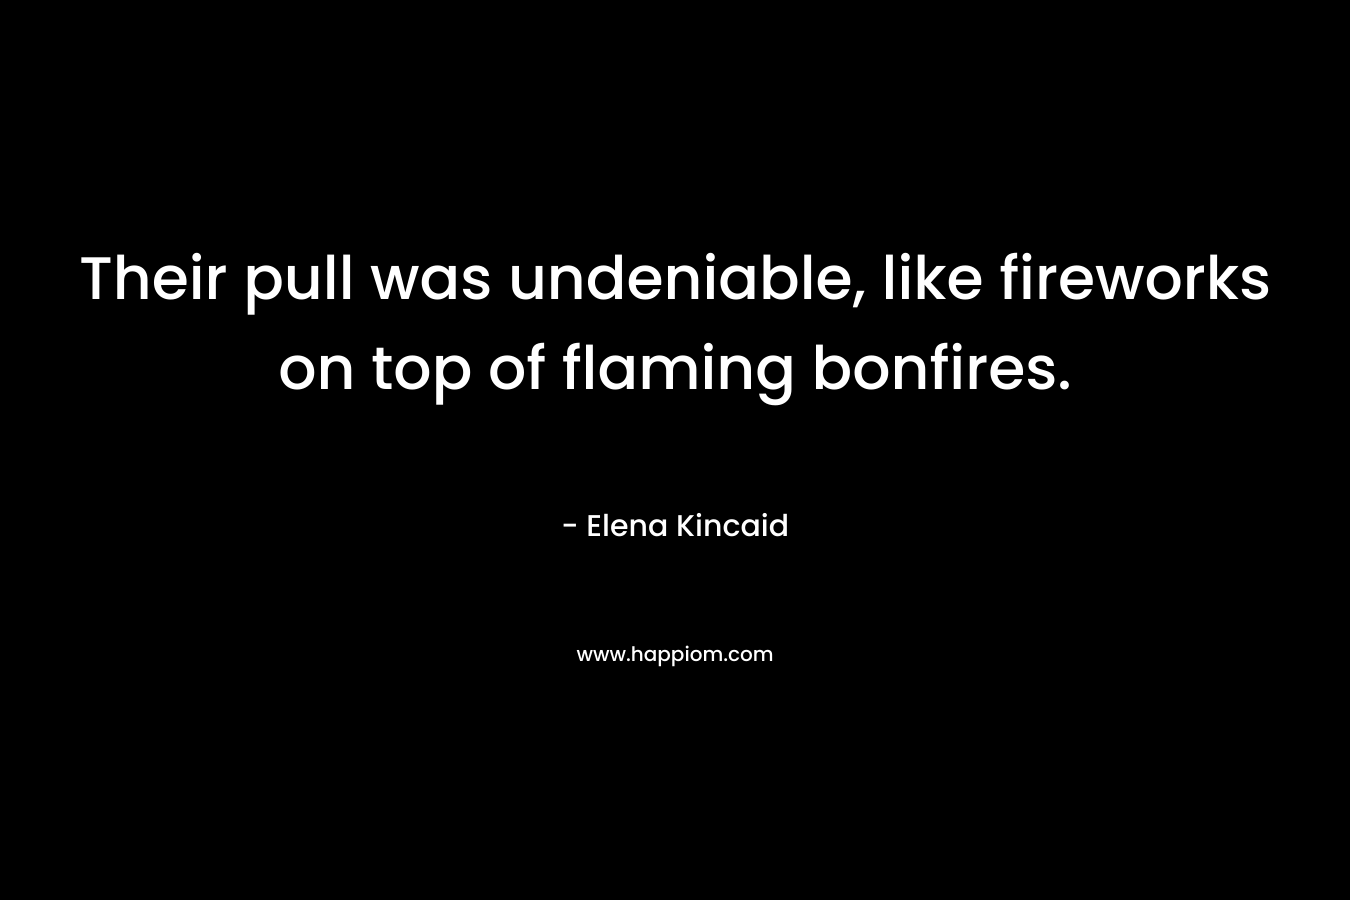 Their pull was undeniable, like fireworks on top of flaming bonfires.